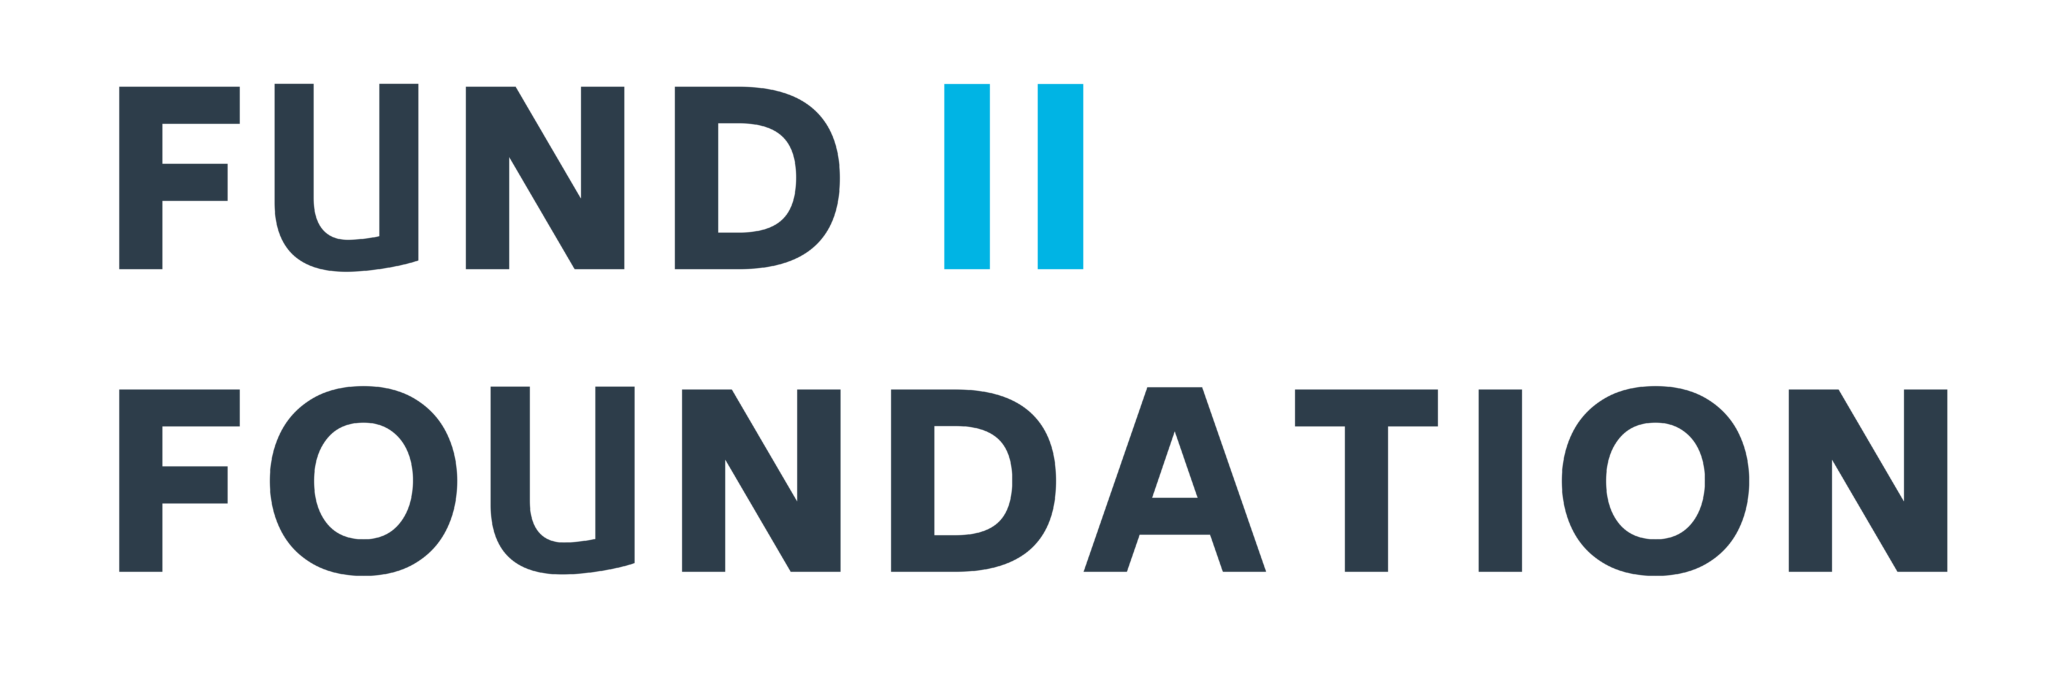 The official logo of Fund II Foundation